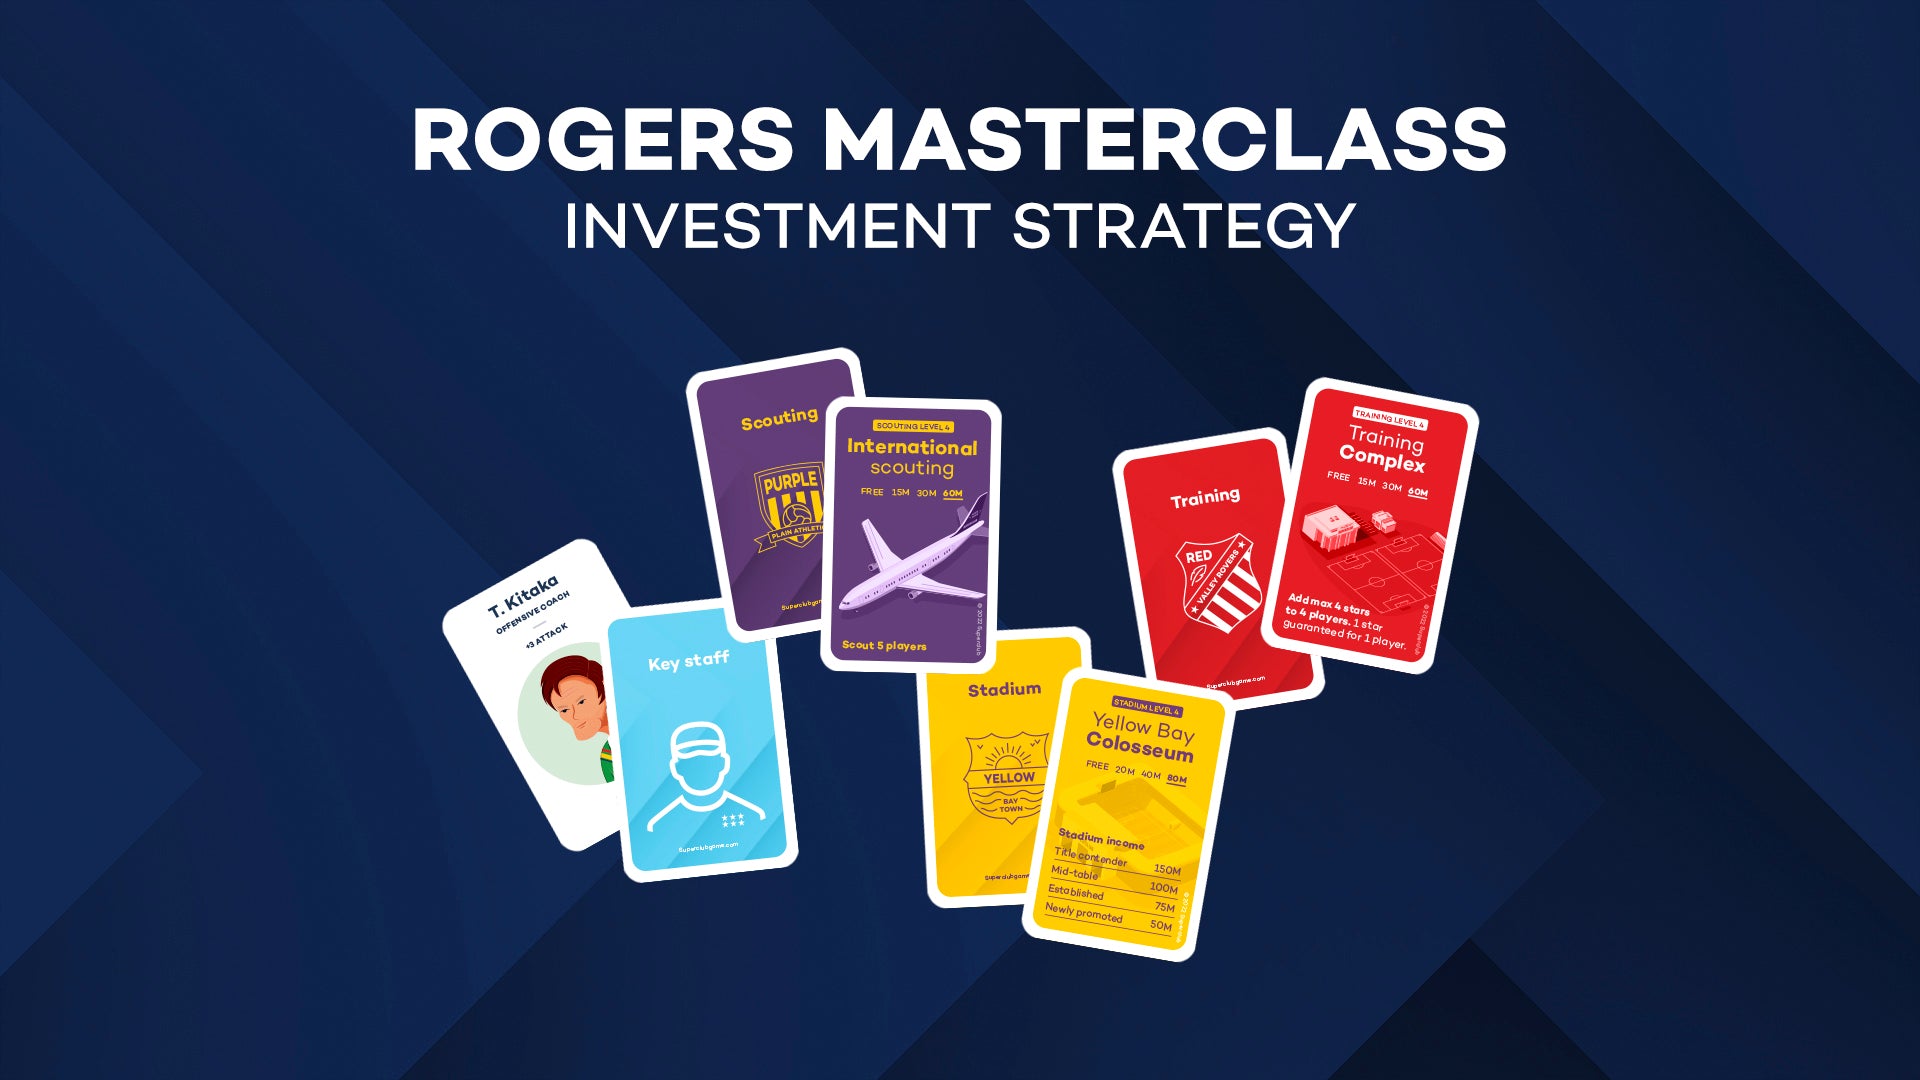 Rogers masterclass: Investment strategy